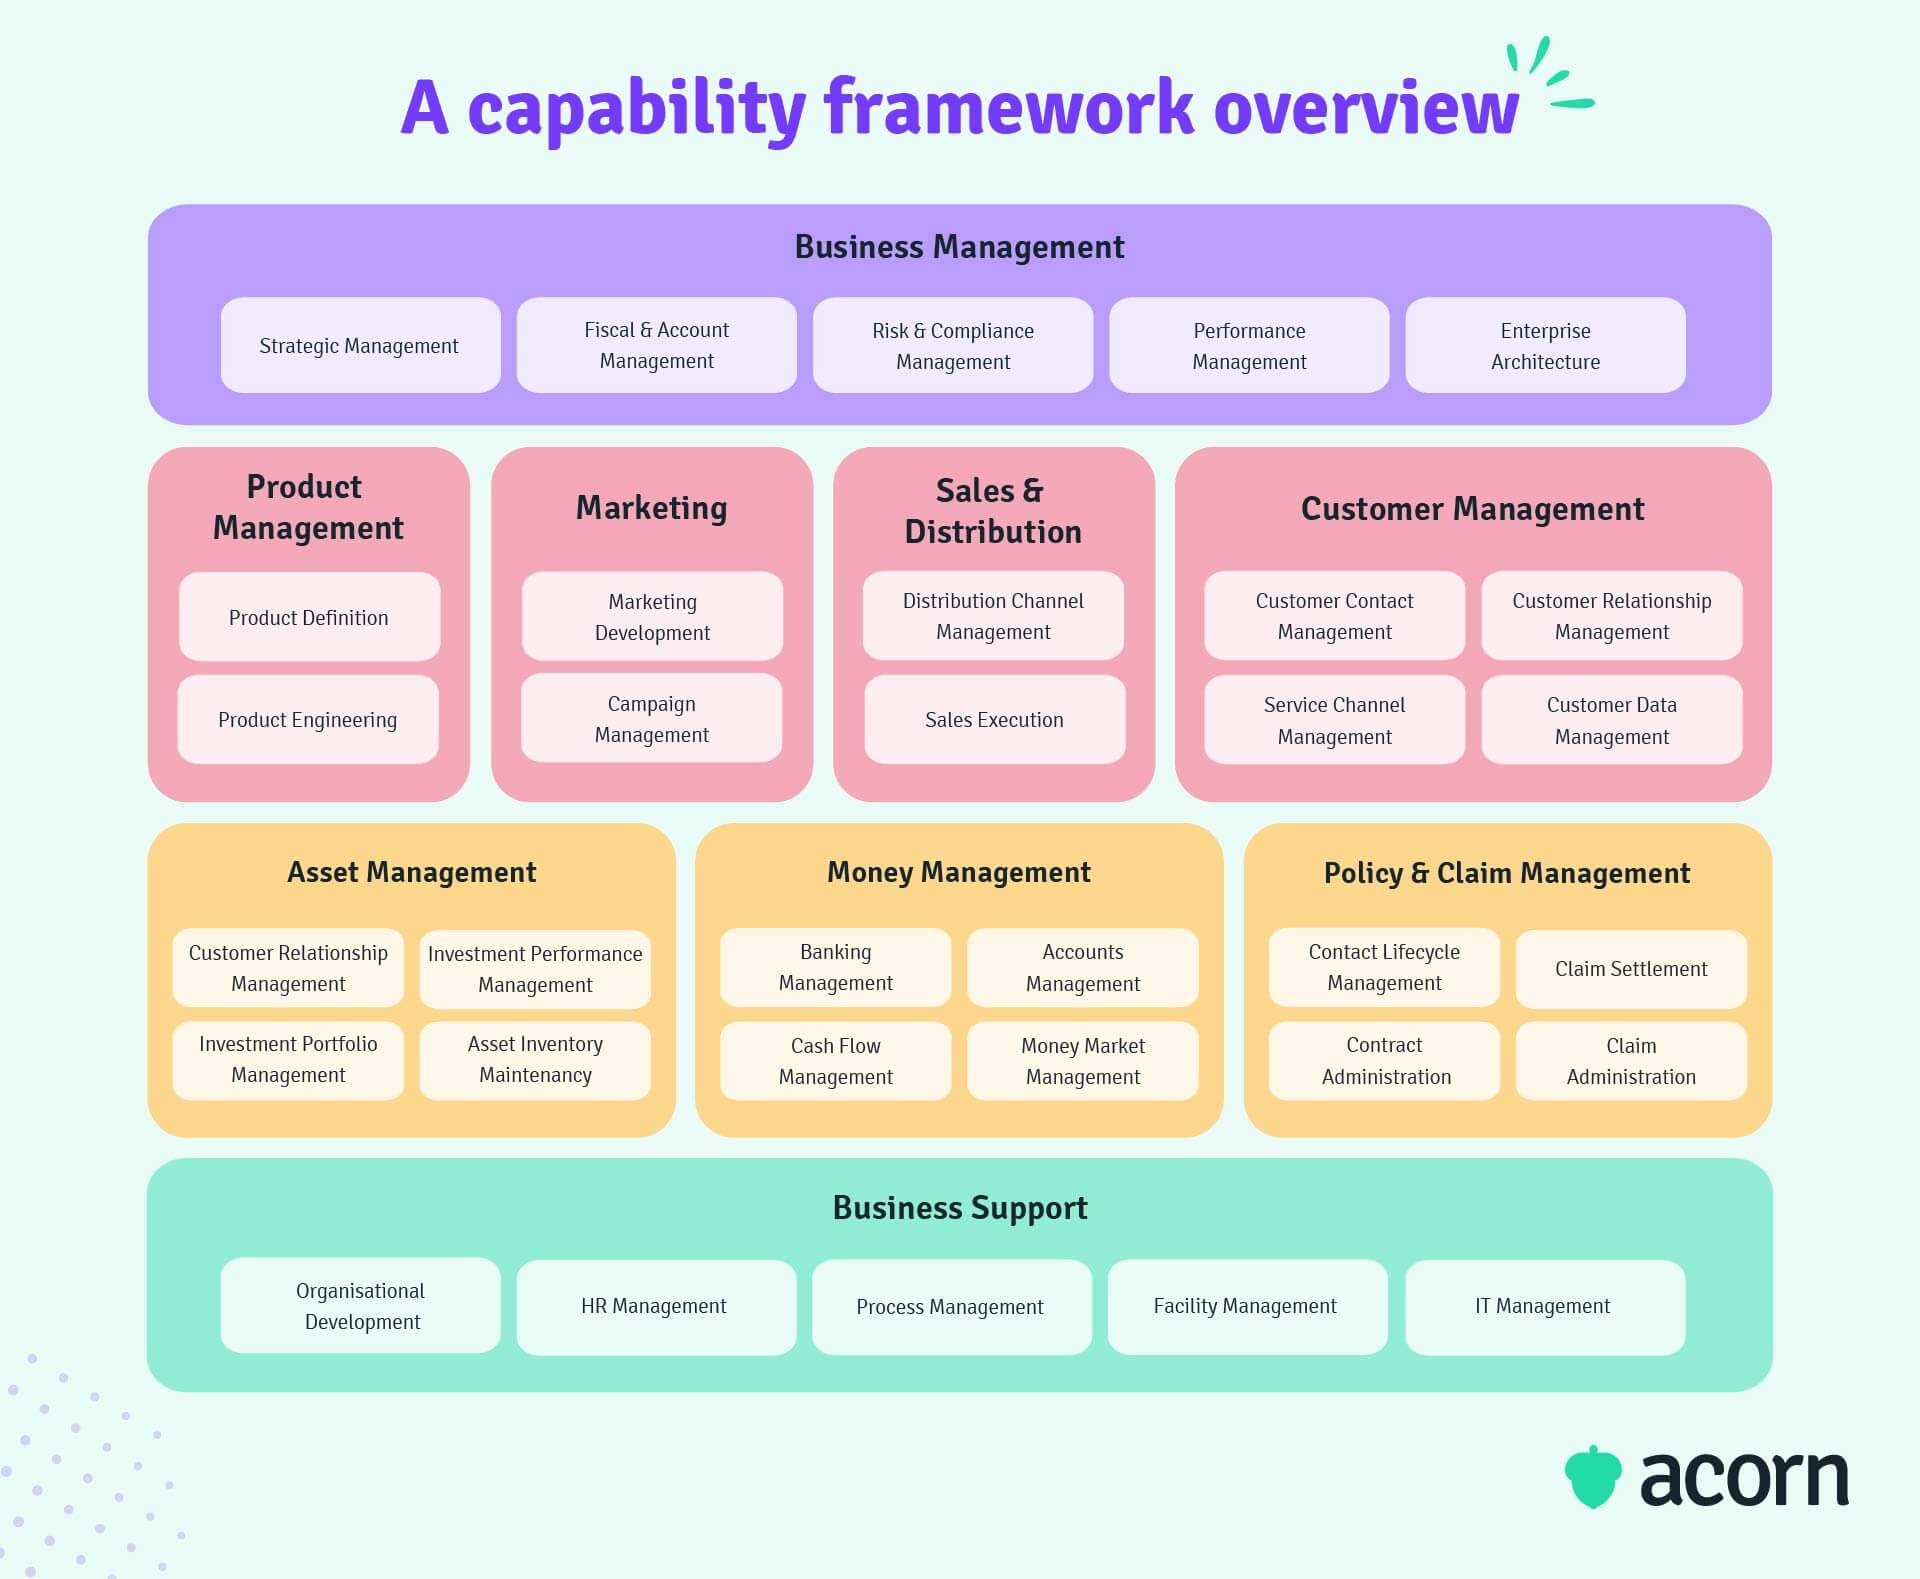 Outline of how a capability framework can be segmented by core areas of business